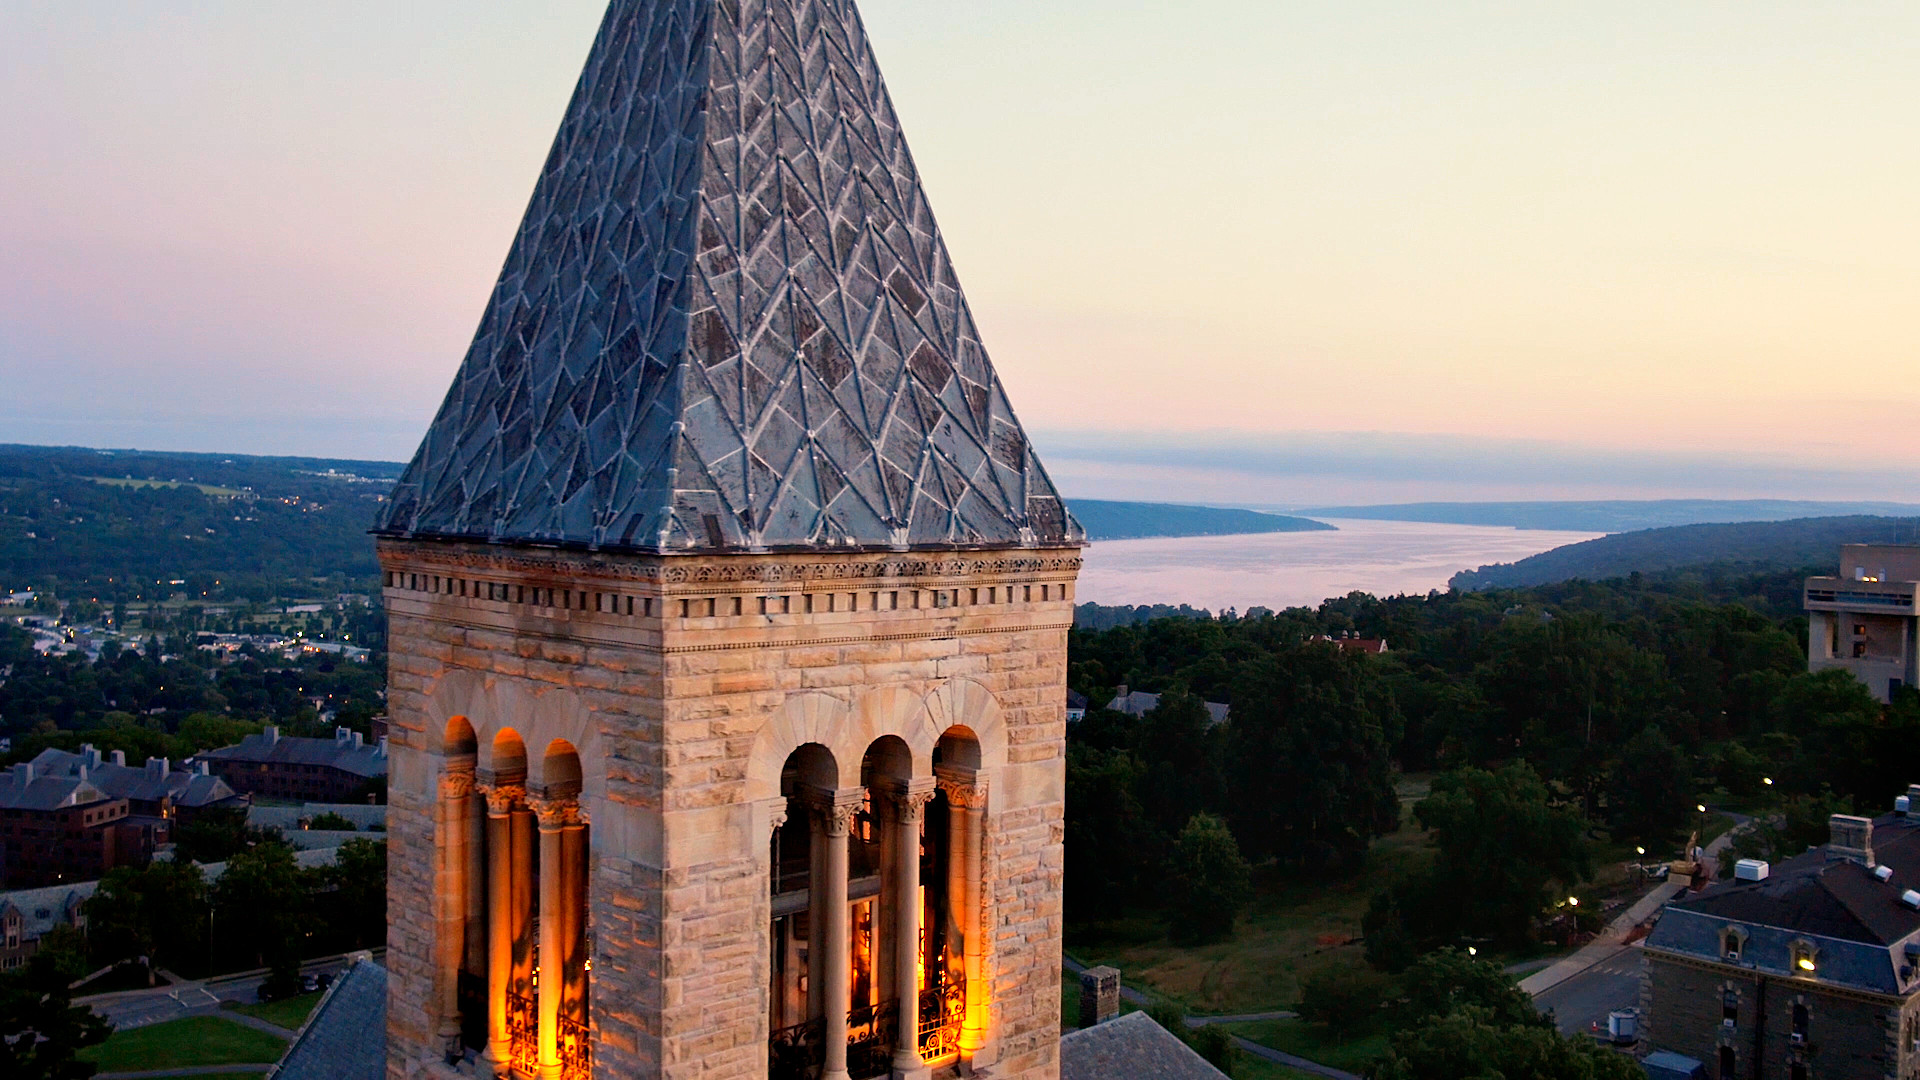 Cornell Clock tower with view of Cayuga Lake behind it